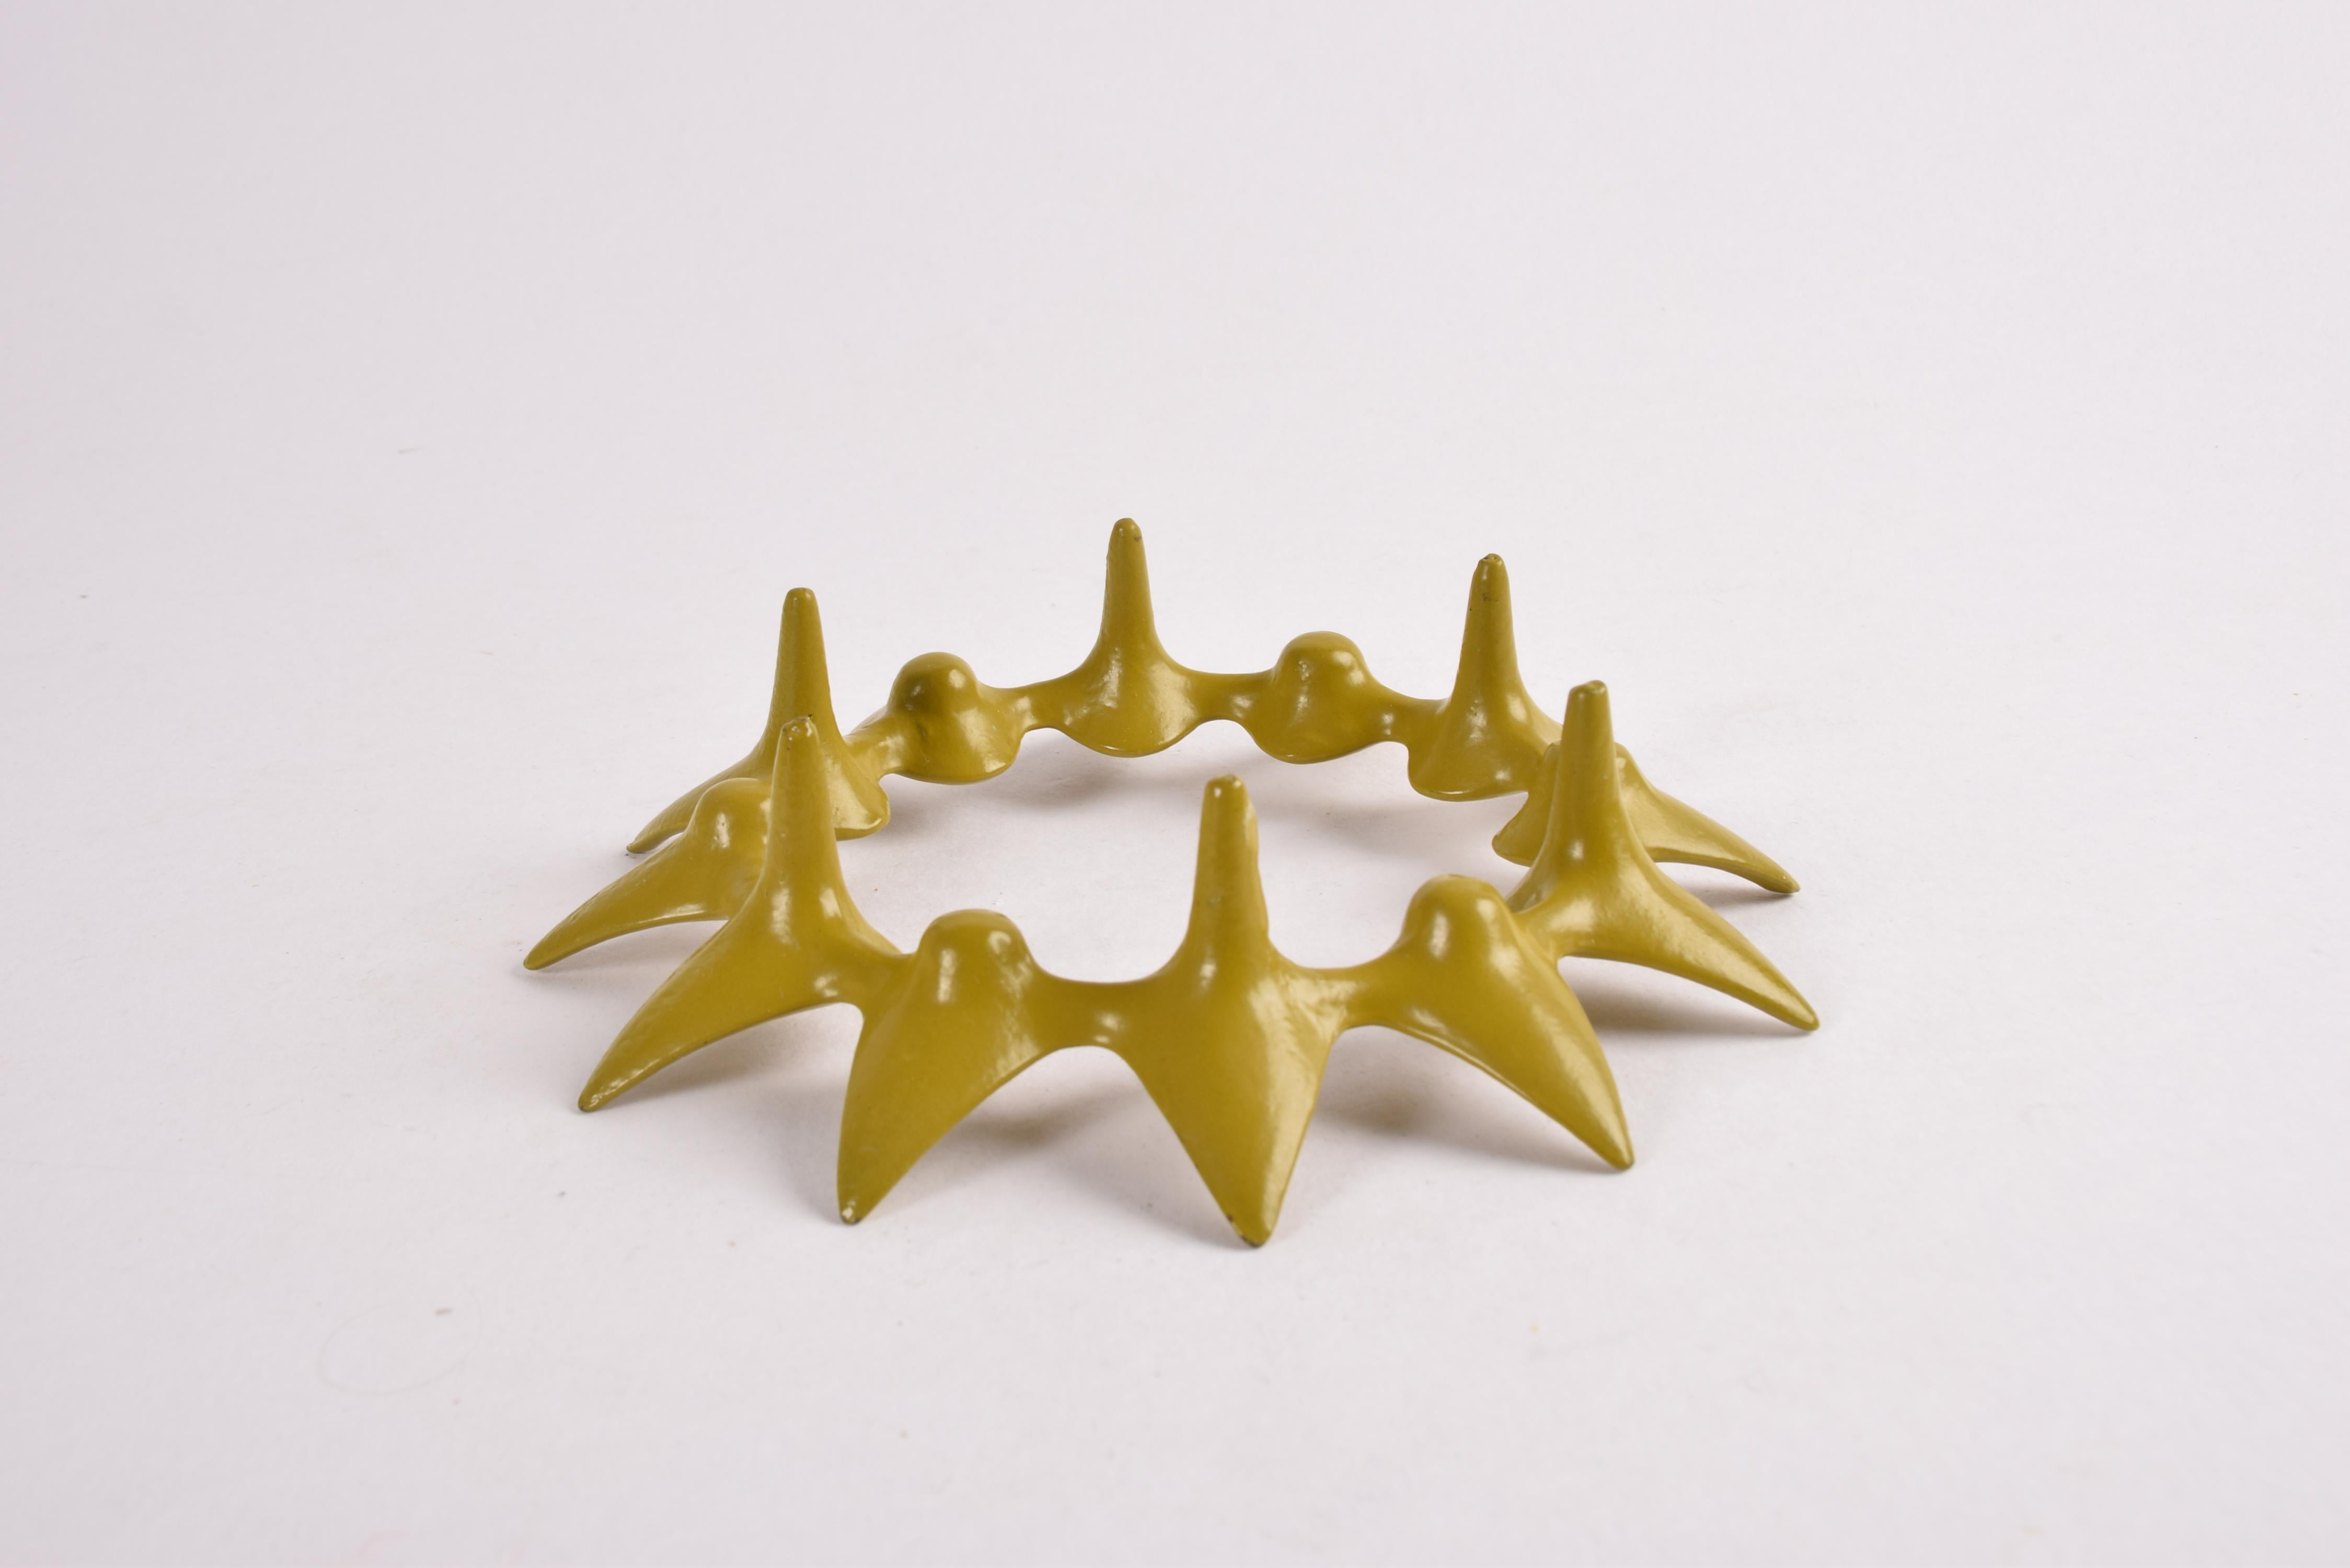 Cast Jens Quistgaard Star Shaped Candle Holder Yellow Green Iron, Danish Modern 1960s For Sale